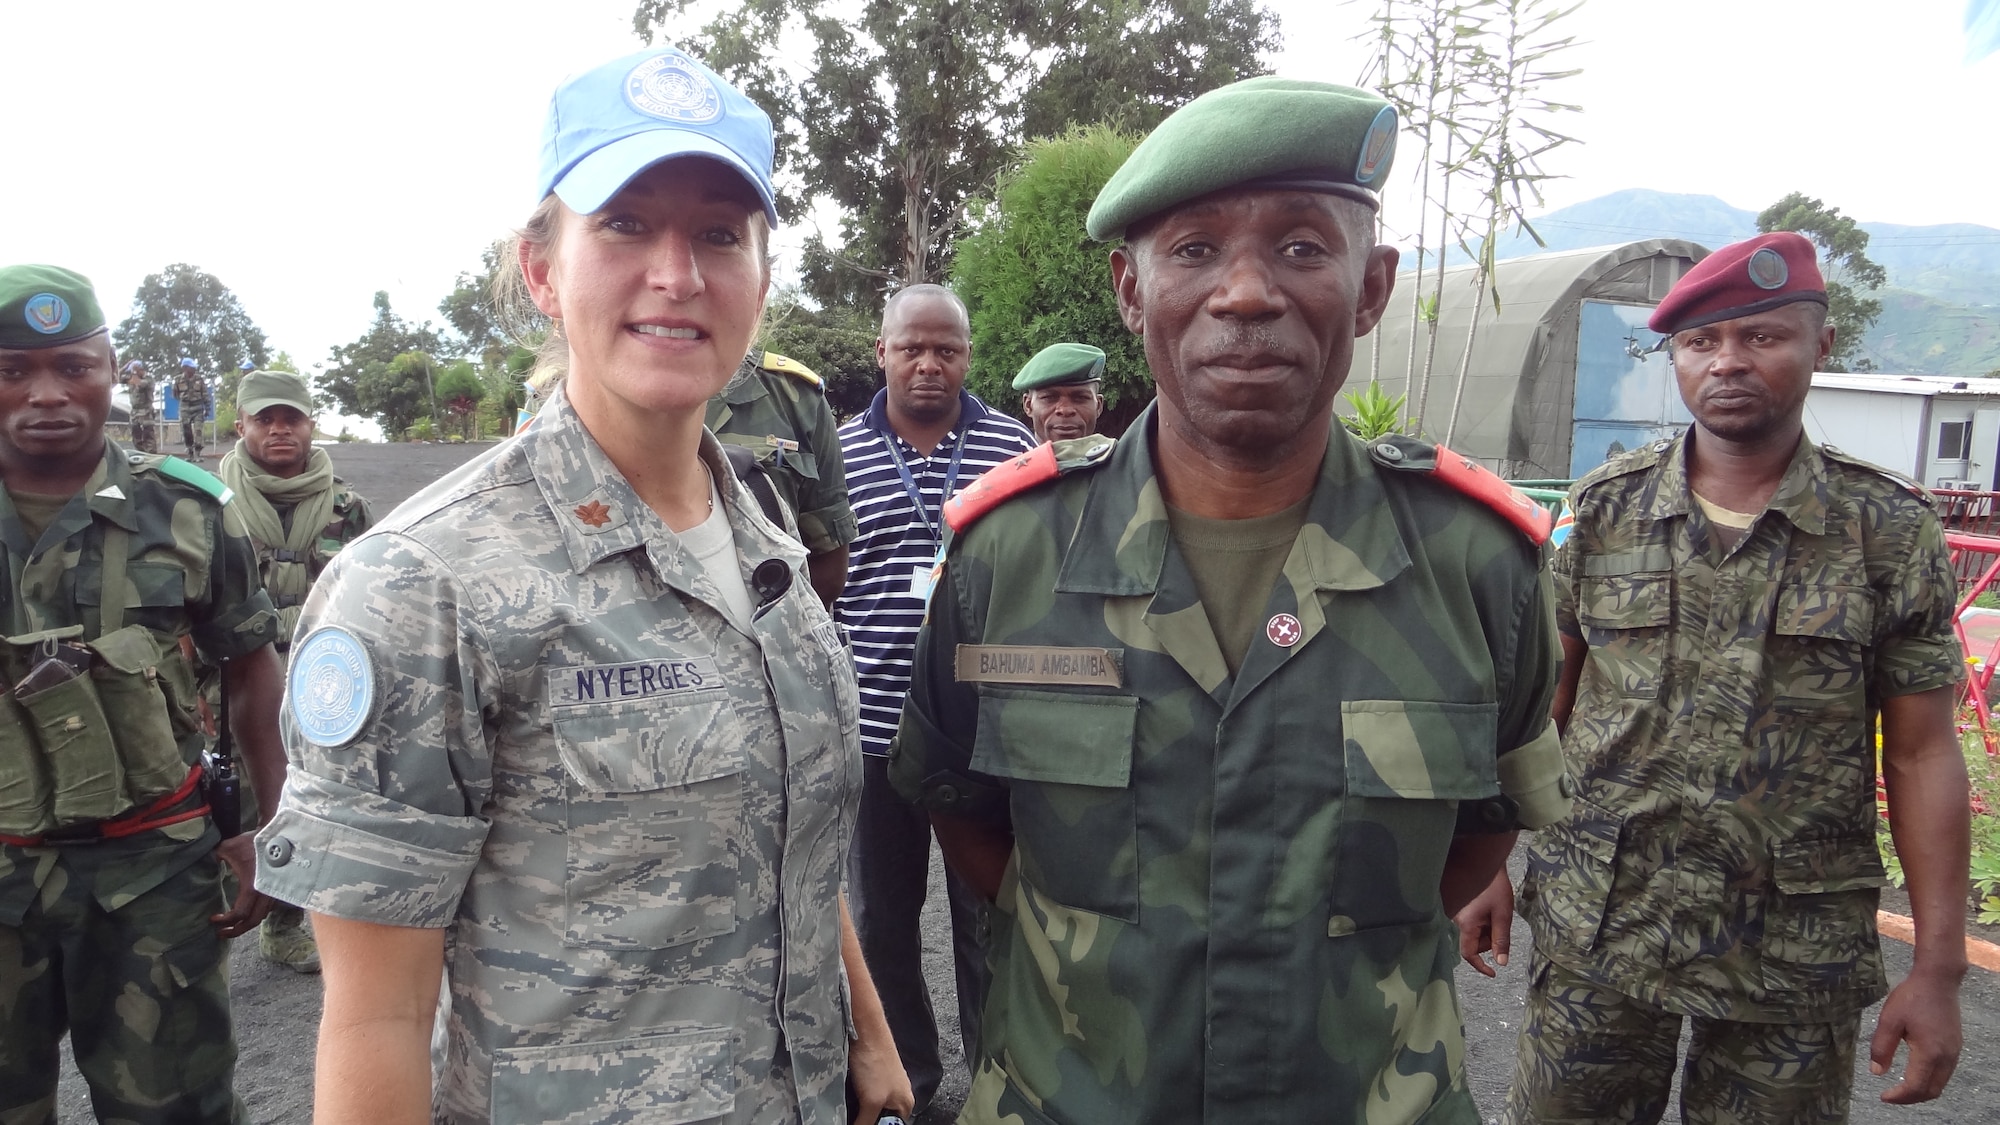 U.S. Air Force Maj. Jana Nyerges with  Democratic republic of the Congo Gen. Bahuma, Goma, Democratic Republic of the Congo, taken during her UN deployment as an intelligence analyst with peacekeepers. (U.S. Air Force Photo courtesy of Maj. Jana Nyerges/Released)